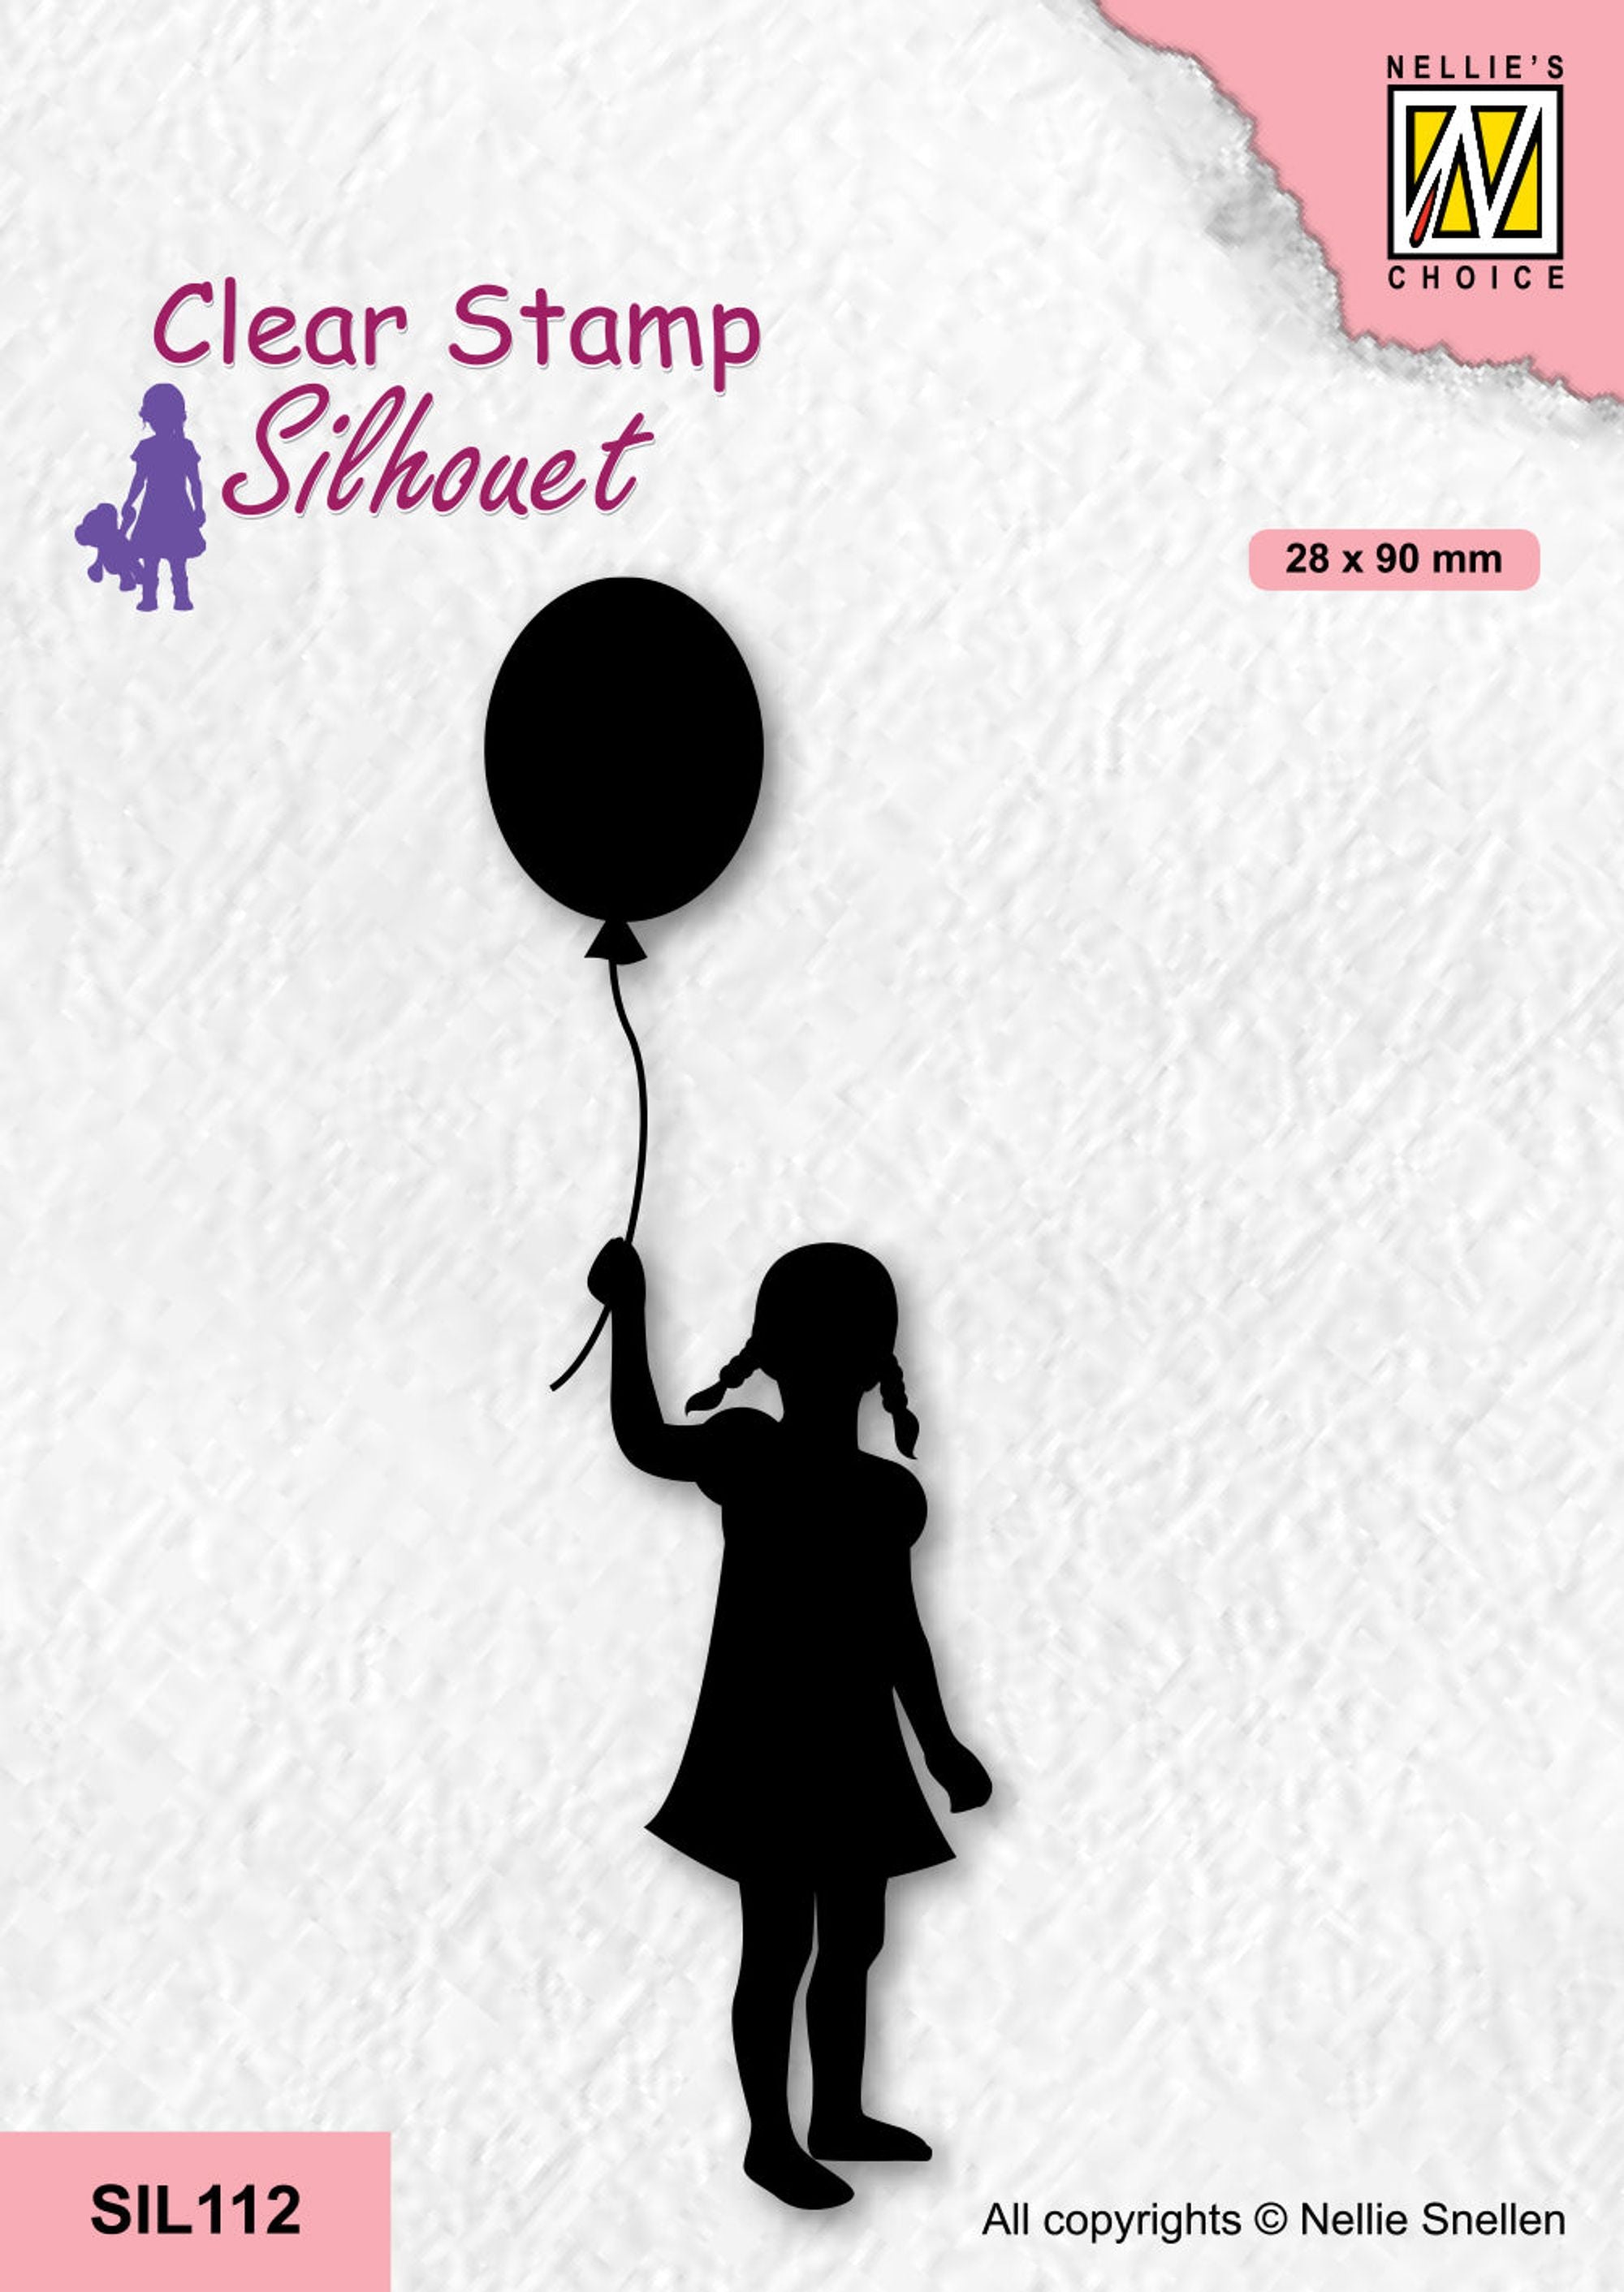 Nellie's Choice Clear Stamp Silhouette - Girl With Balloon